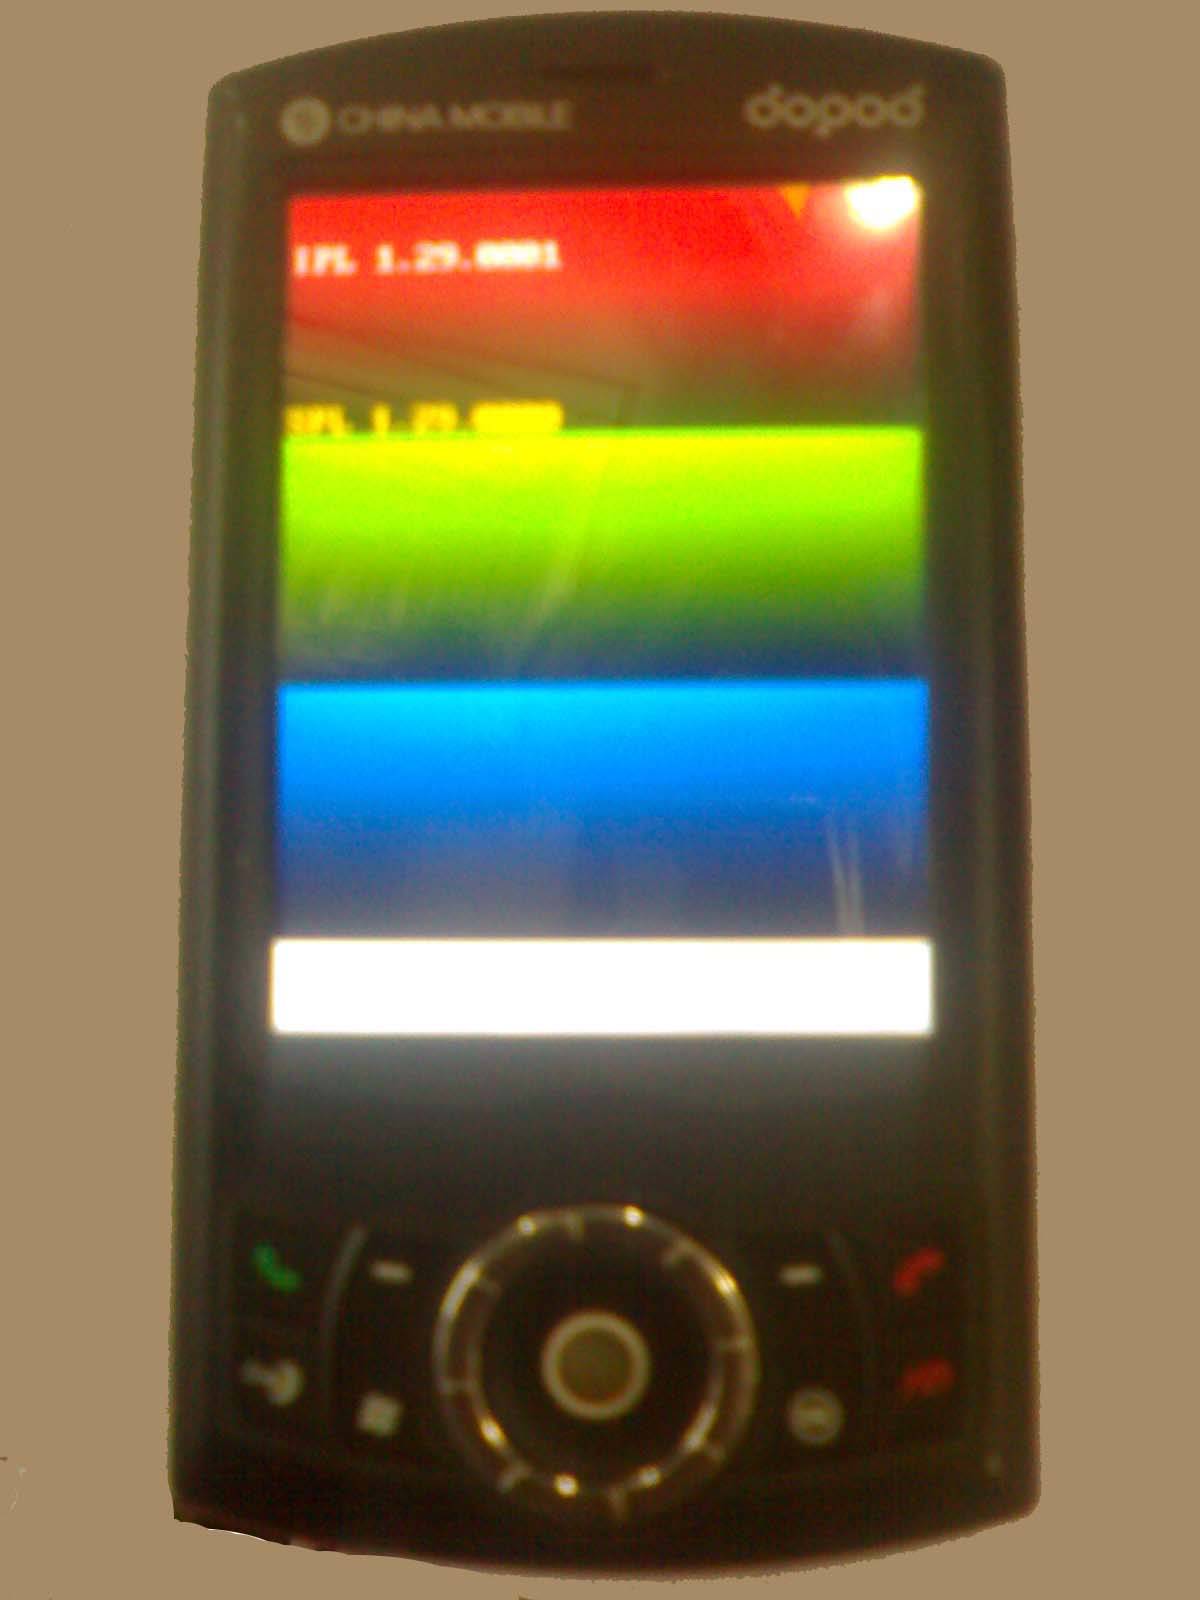 New Software For Htc P3300